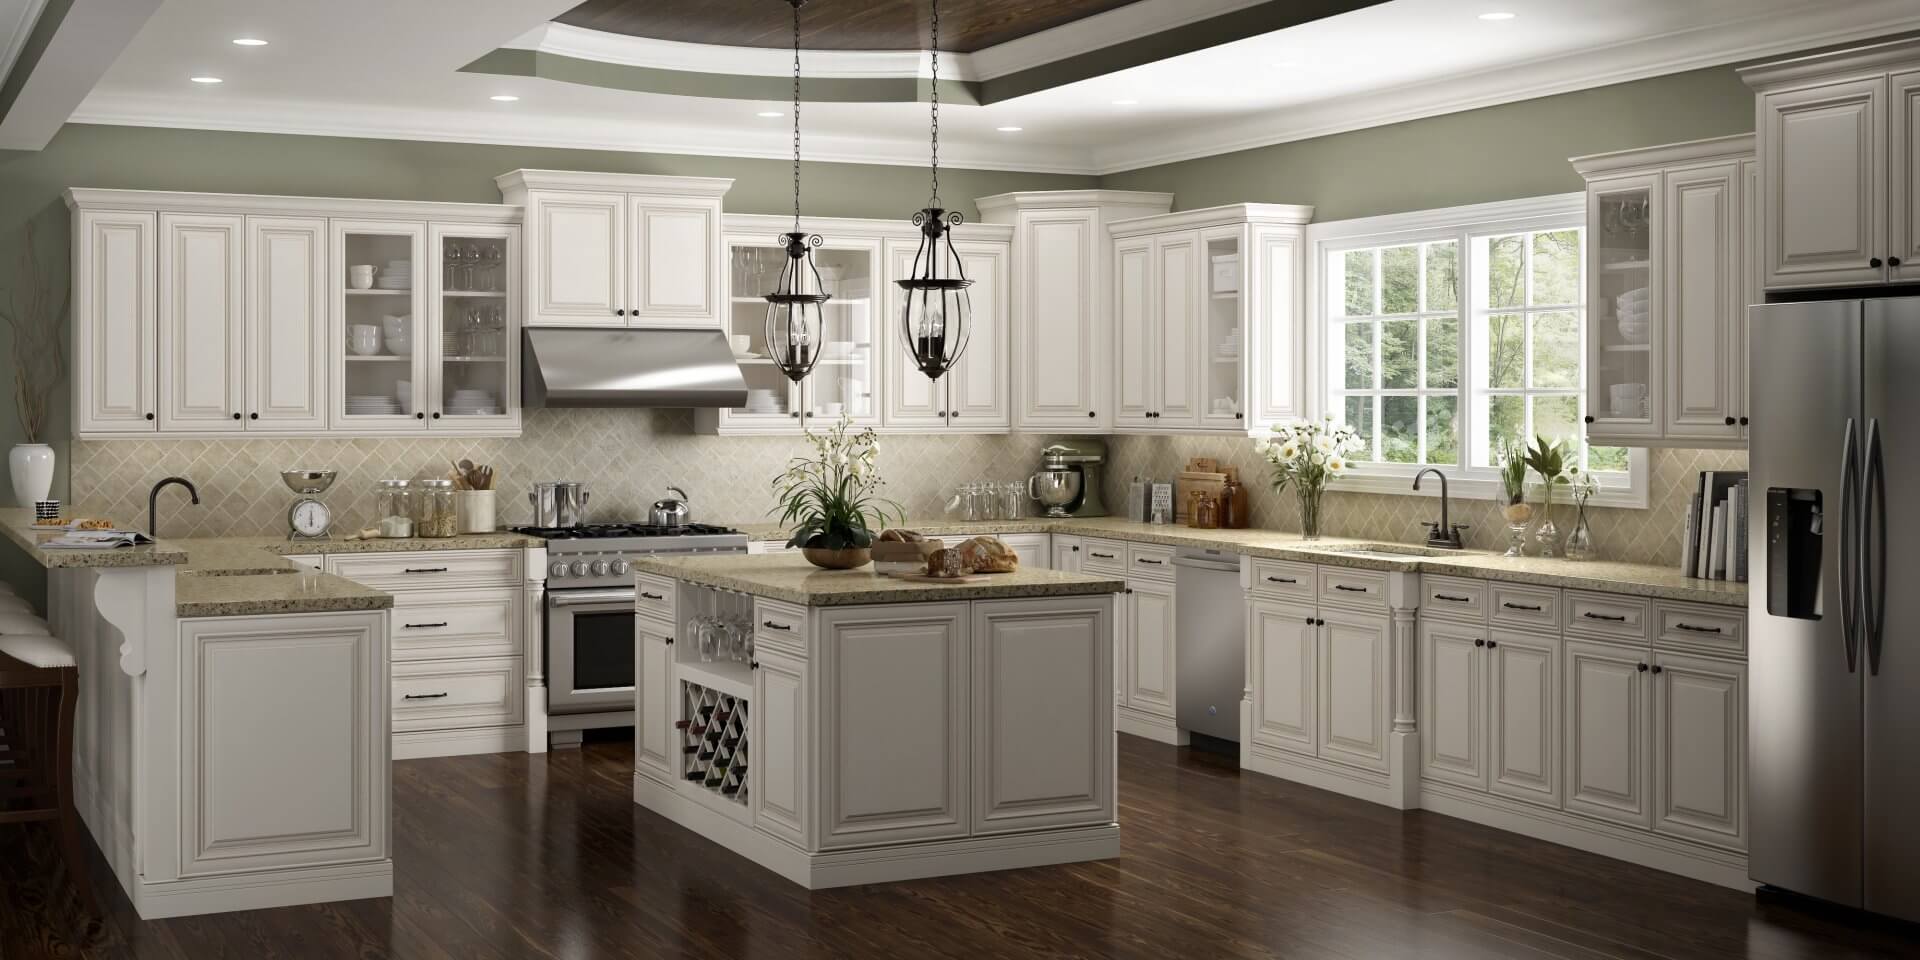 Creatice White Glazed Kitchen Cabinets for Large Space